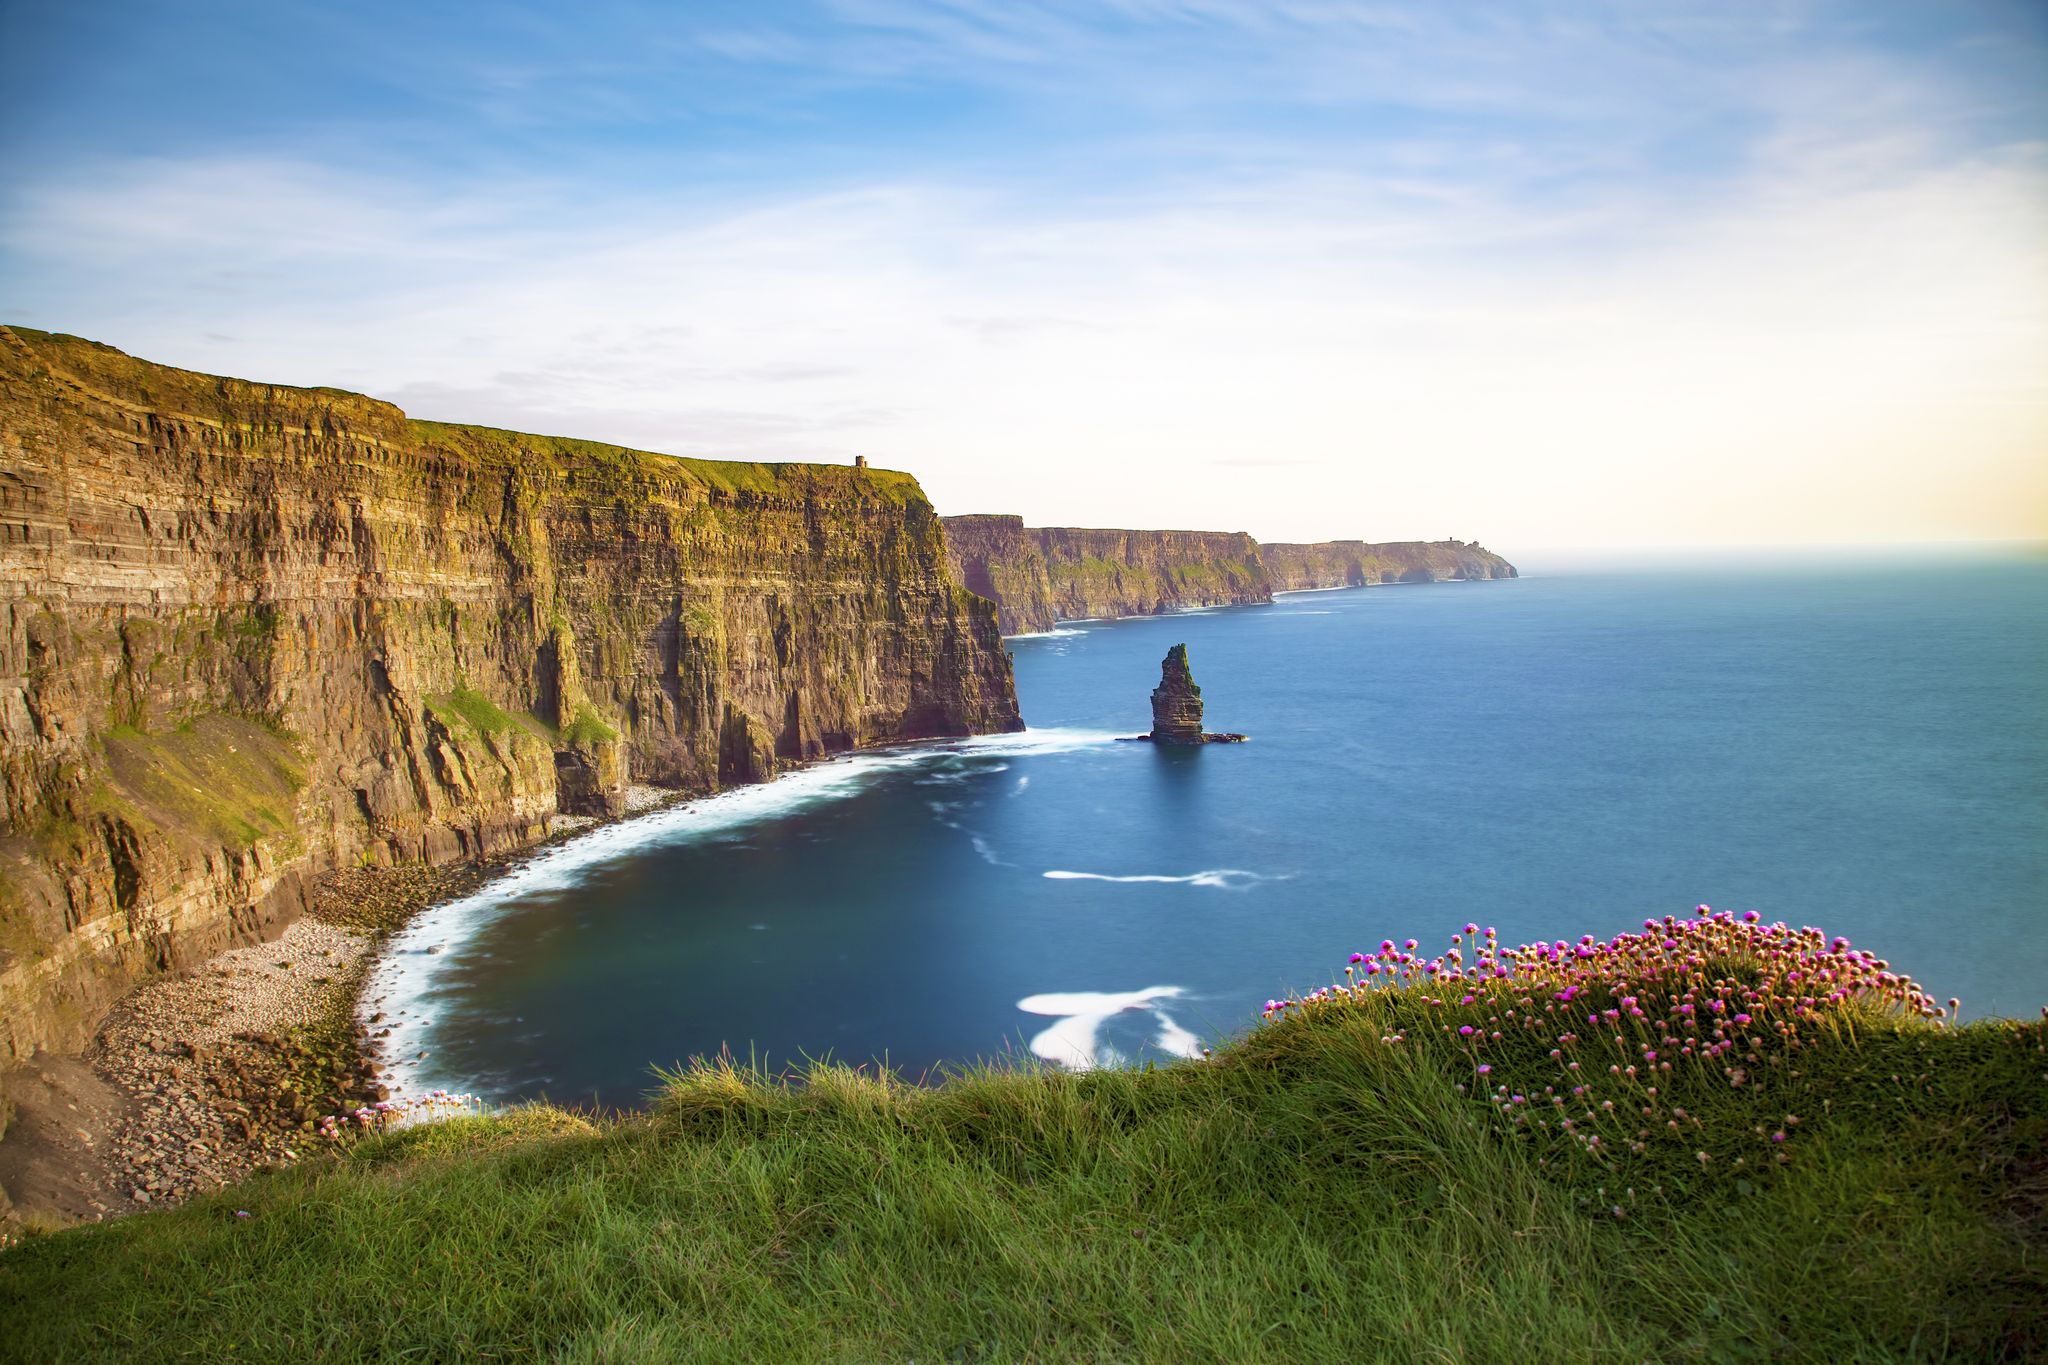 Scenic View Of Cliffs Of Moher, Liscannor, Ireland